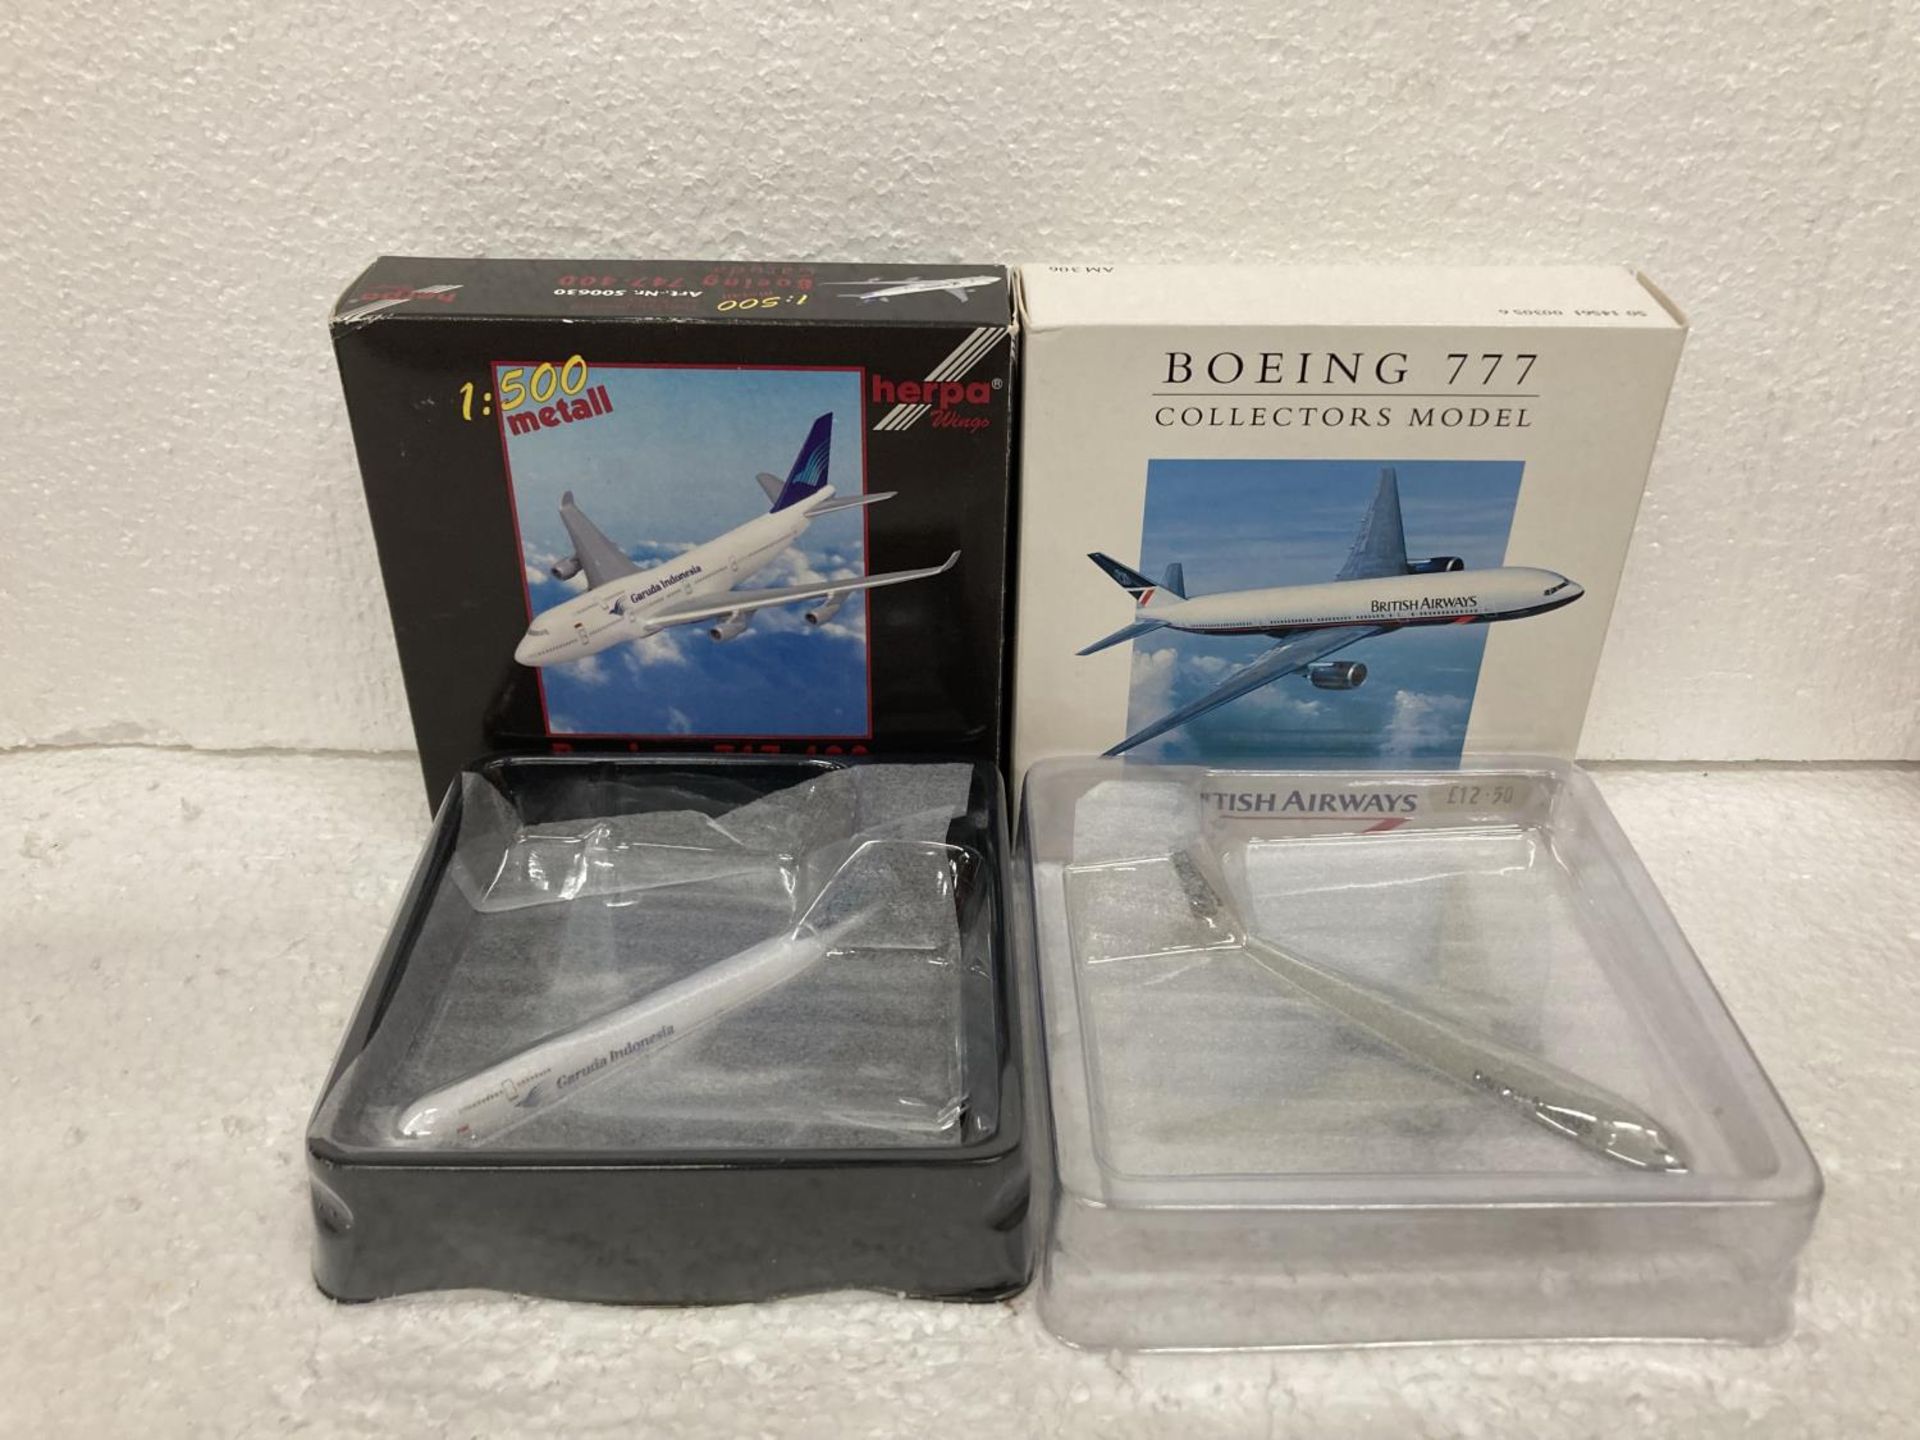 FOUR HERPA WINGS COLLECTION PLANES TO INCLUDE - GARUDA INDONESIA BOEING 747-400 MODEL 500630, - Image 2 of 3